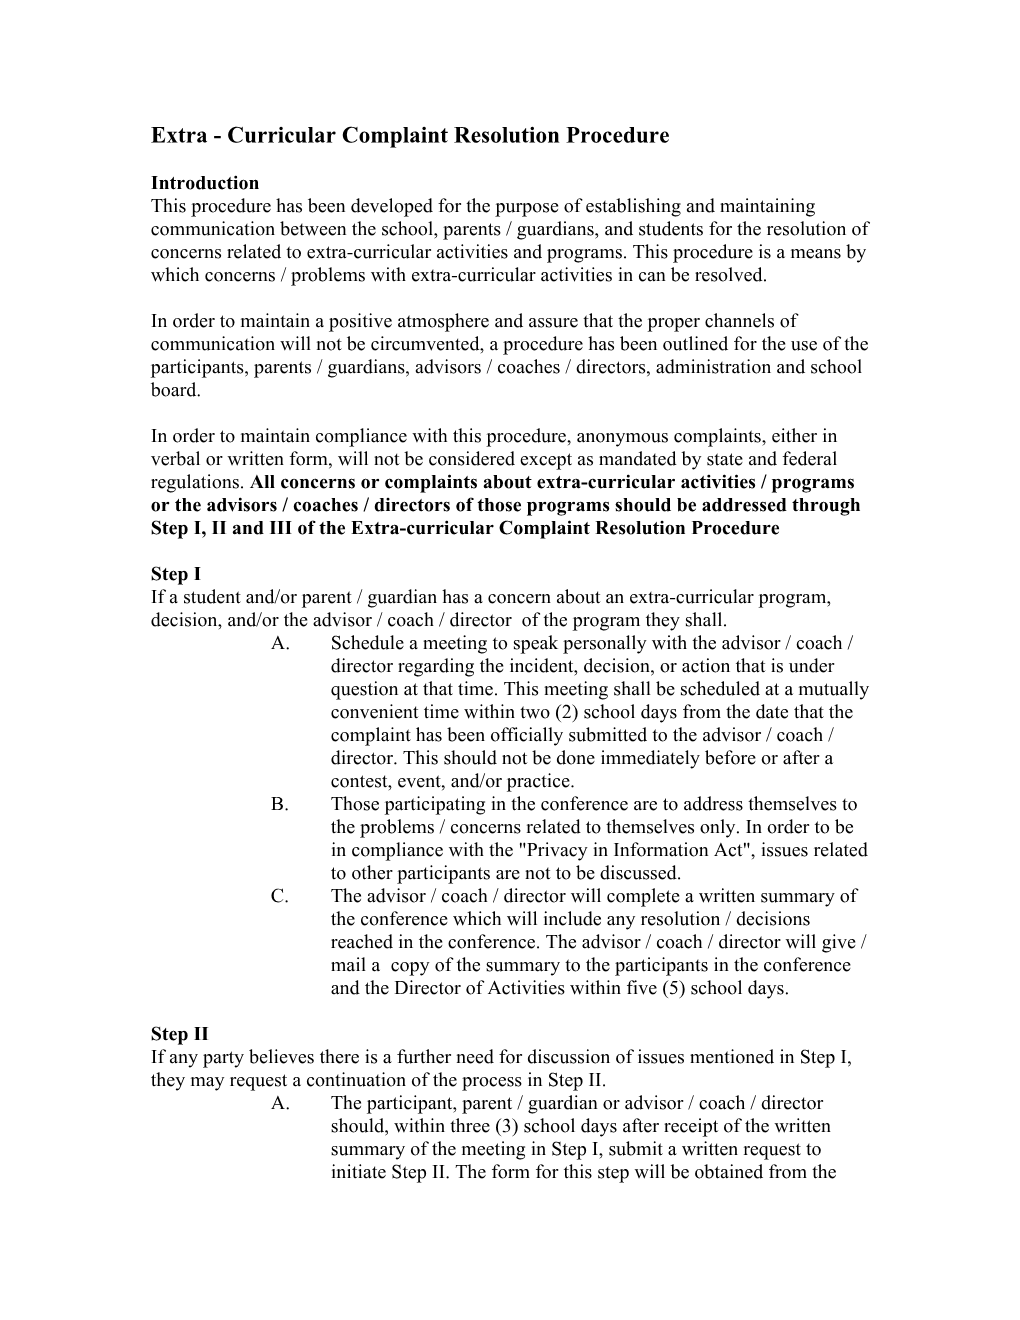 Extra - Curricular Complaint Resolution Policy